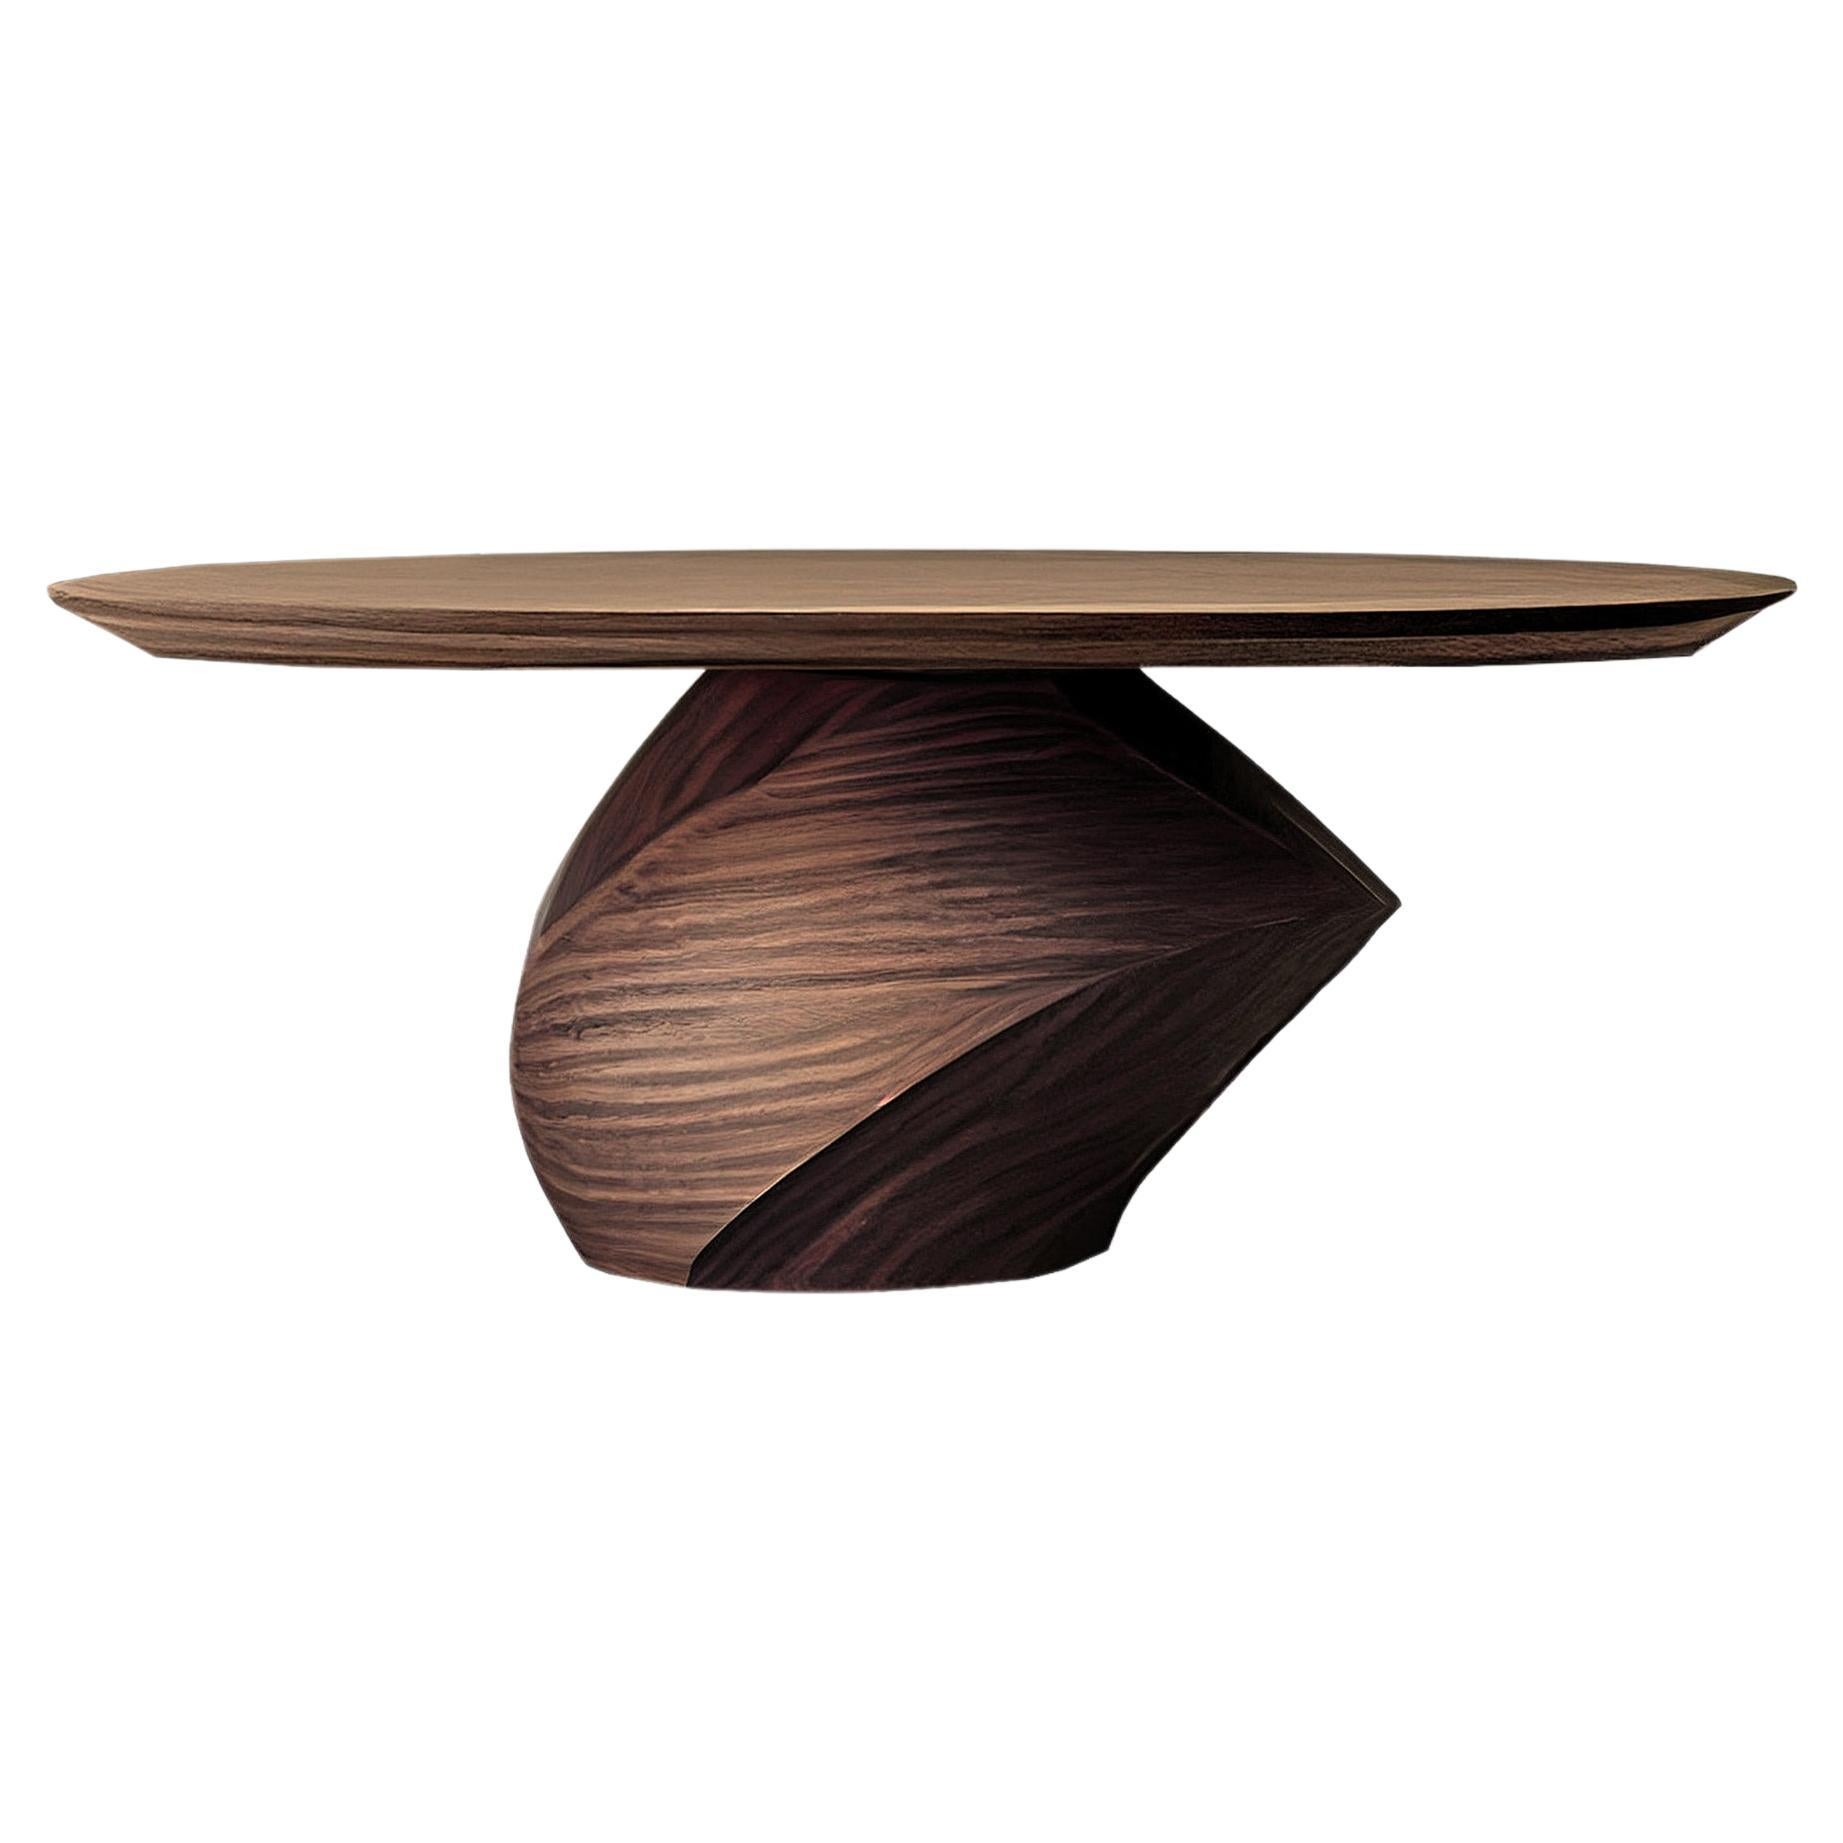 Sculptural Coffee Table Made of Solid Walnut Wood, Center Table Solace S8